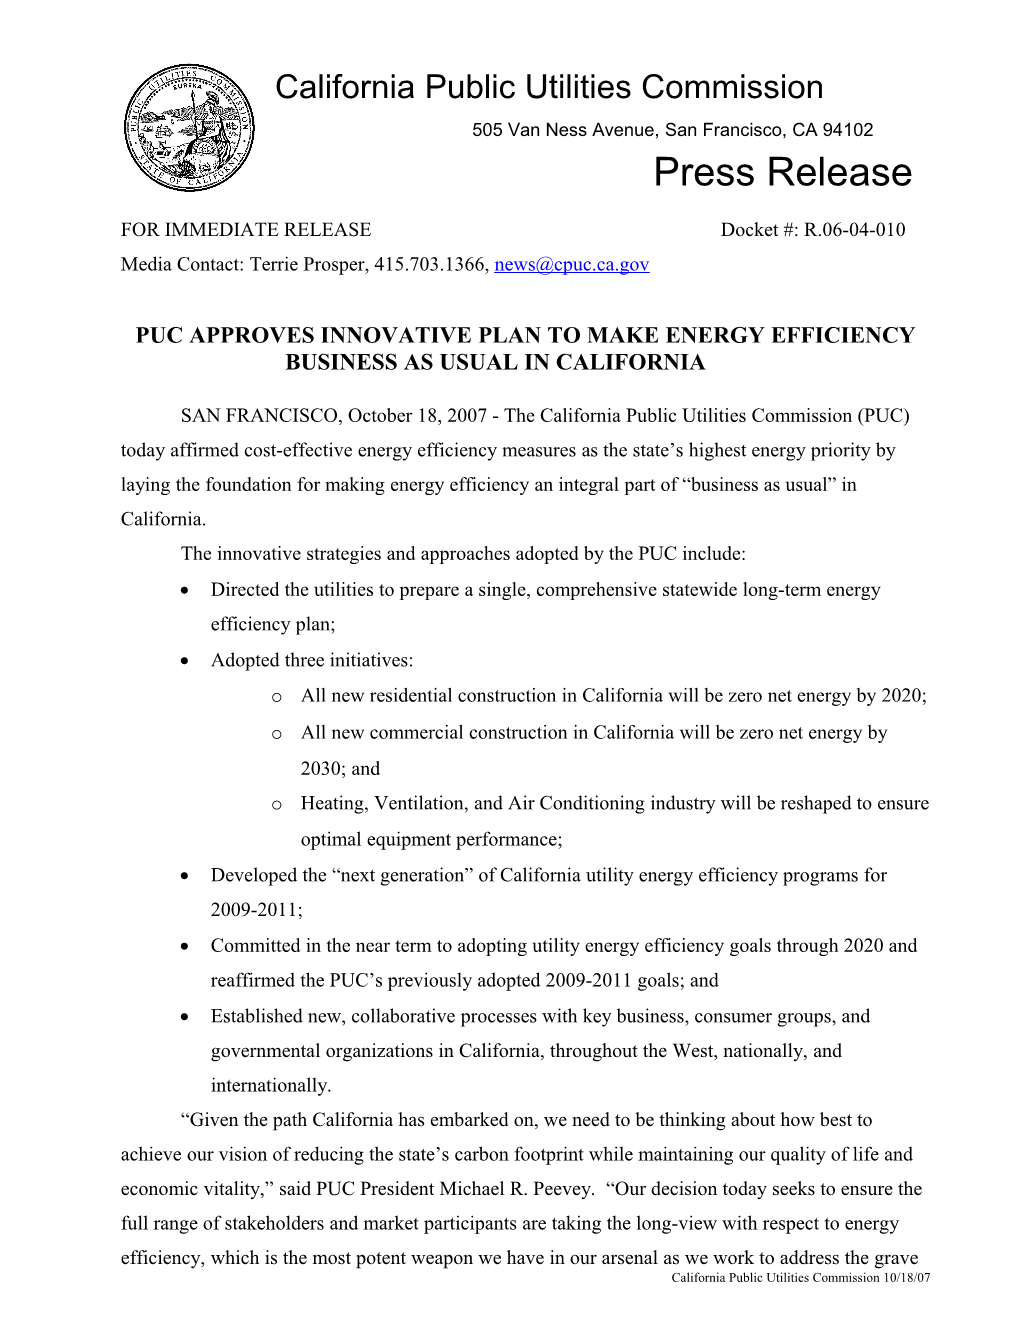 Puc Approves Innovative Plan to Make Energy Efficiency Business As Usual in California